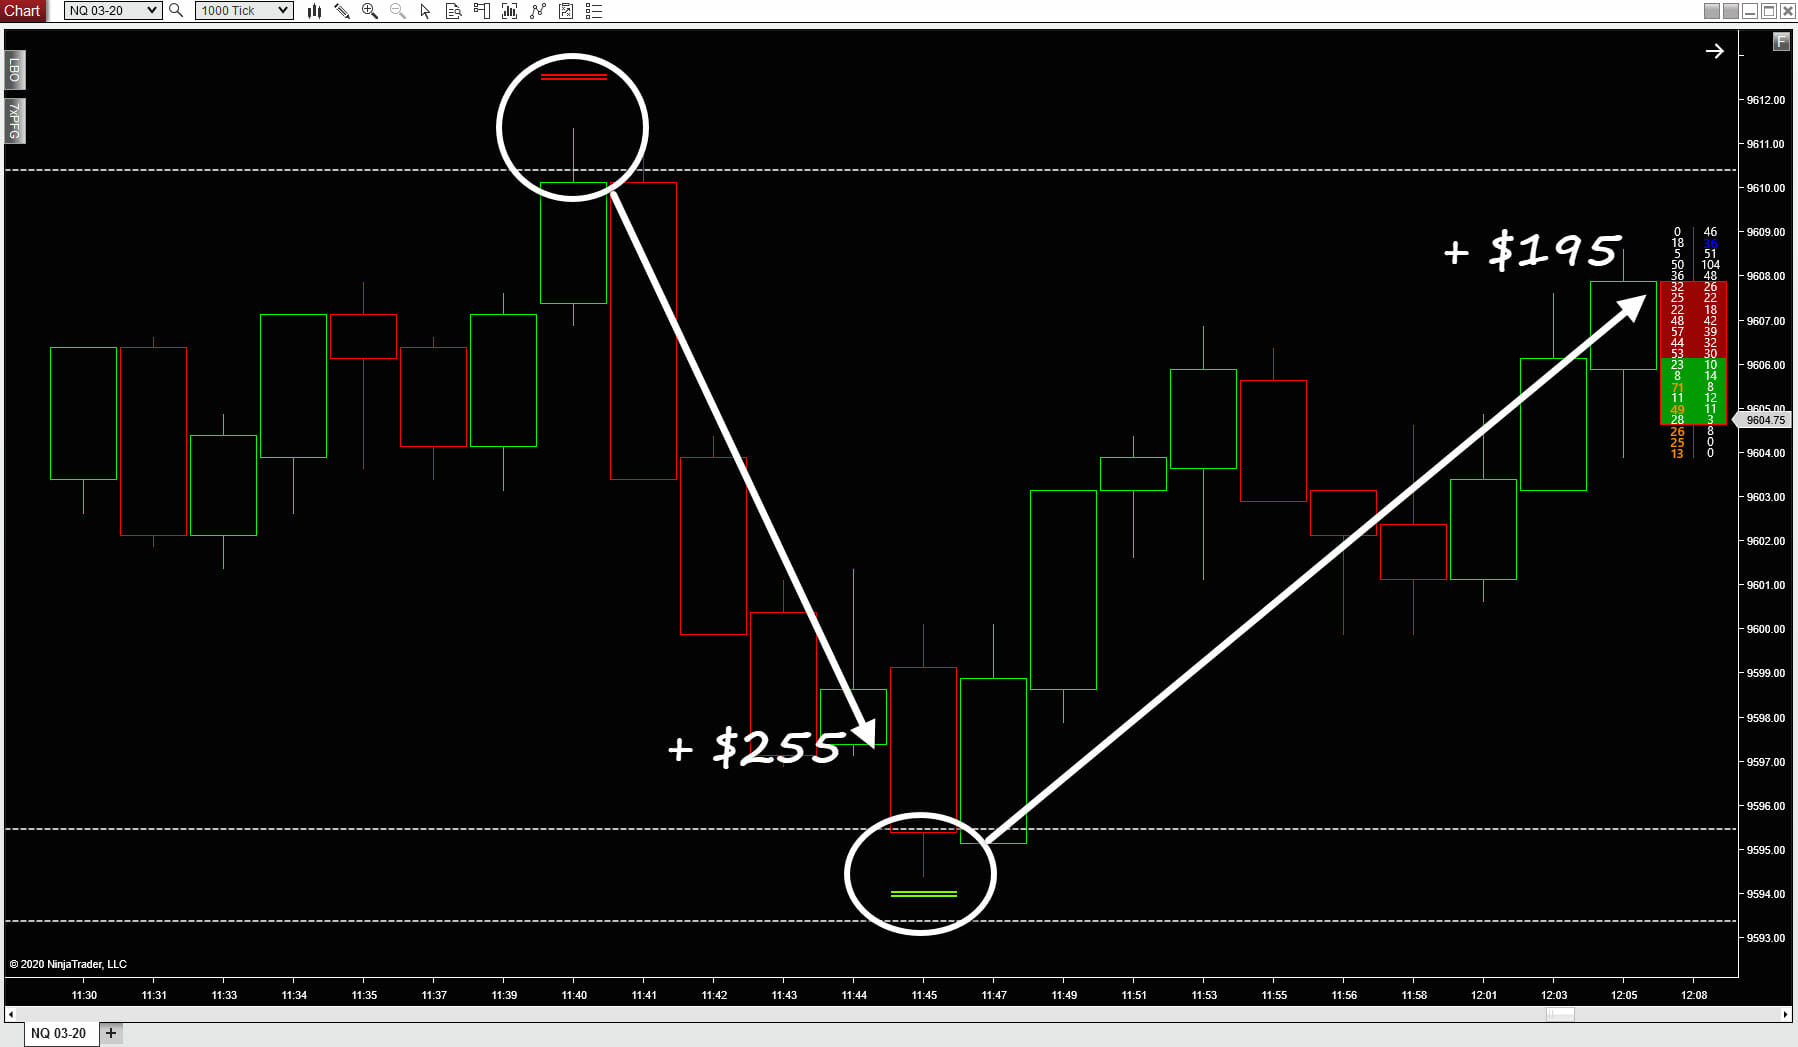 Opportunities for gain on a 6 minute chart using a hybrid of price action and order flow indicators.